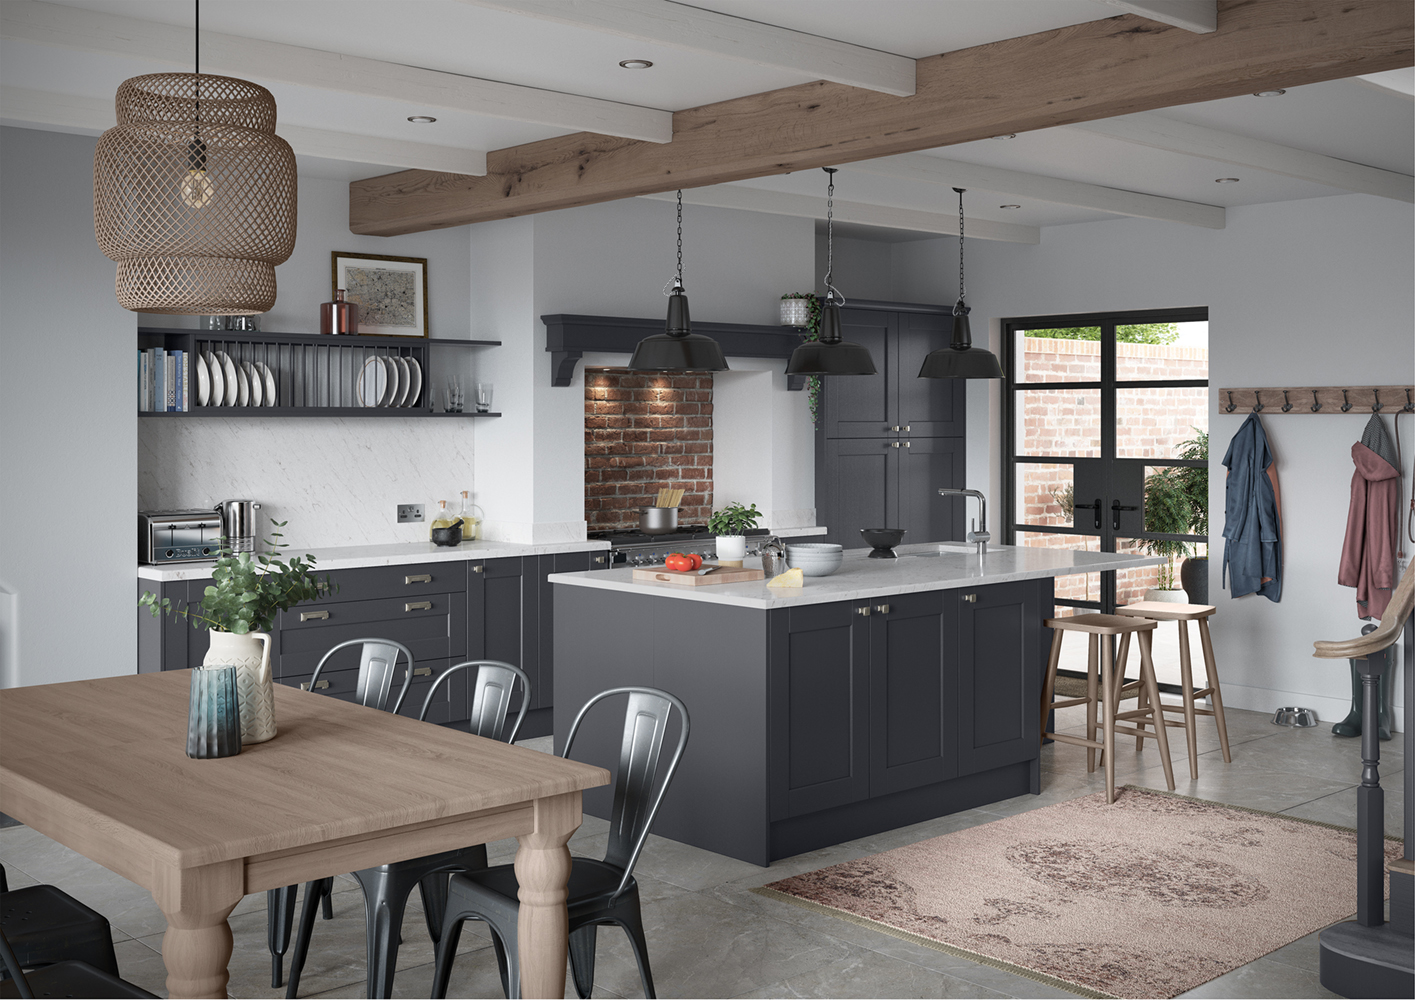 The Kendal Indigo shaker kitchen, made by The Kitchen Depot